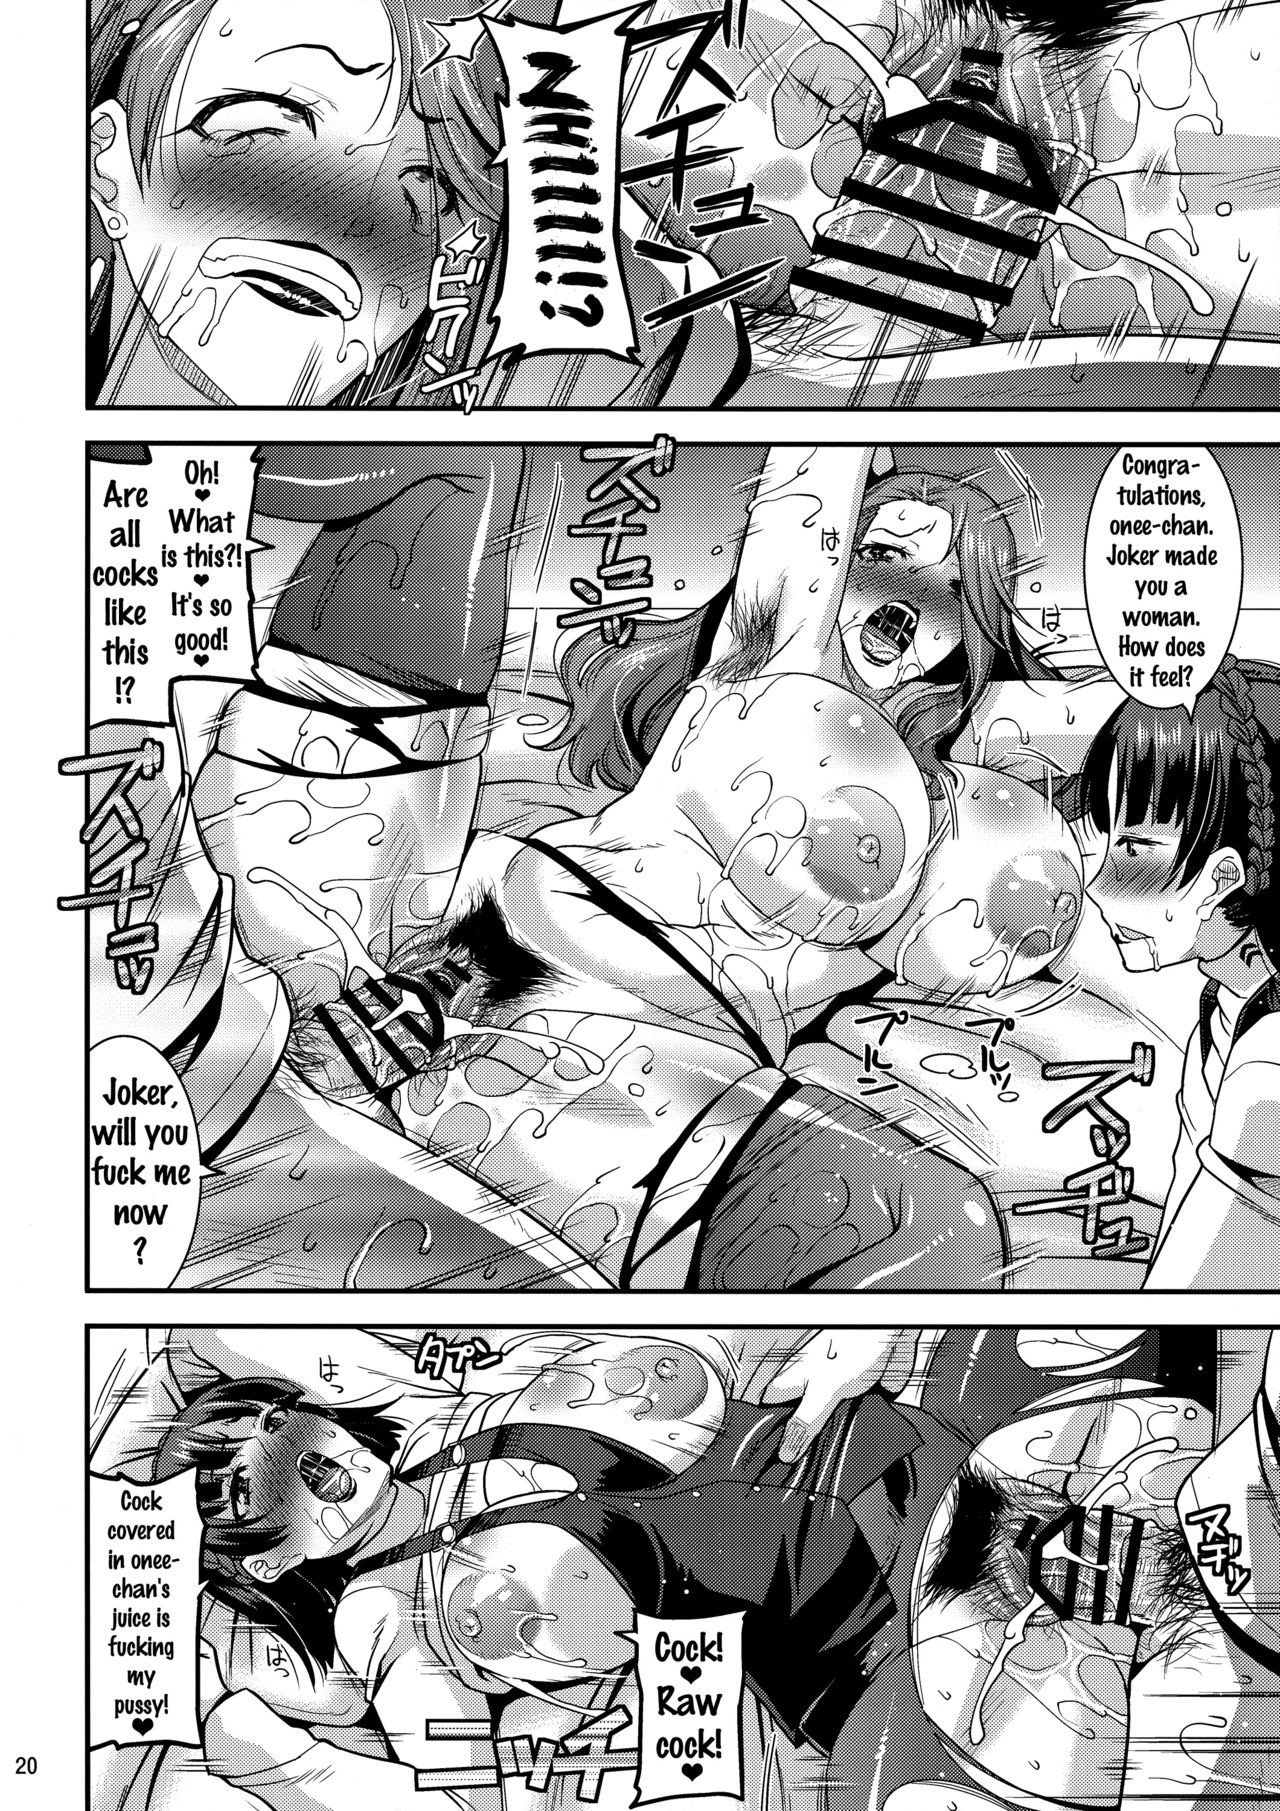 LET US START THE SEX hentai manga picture 19